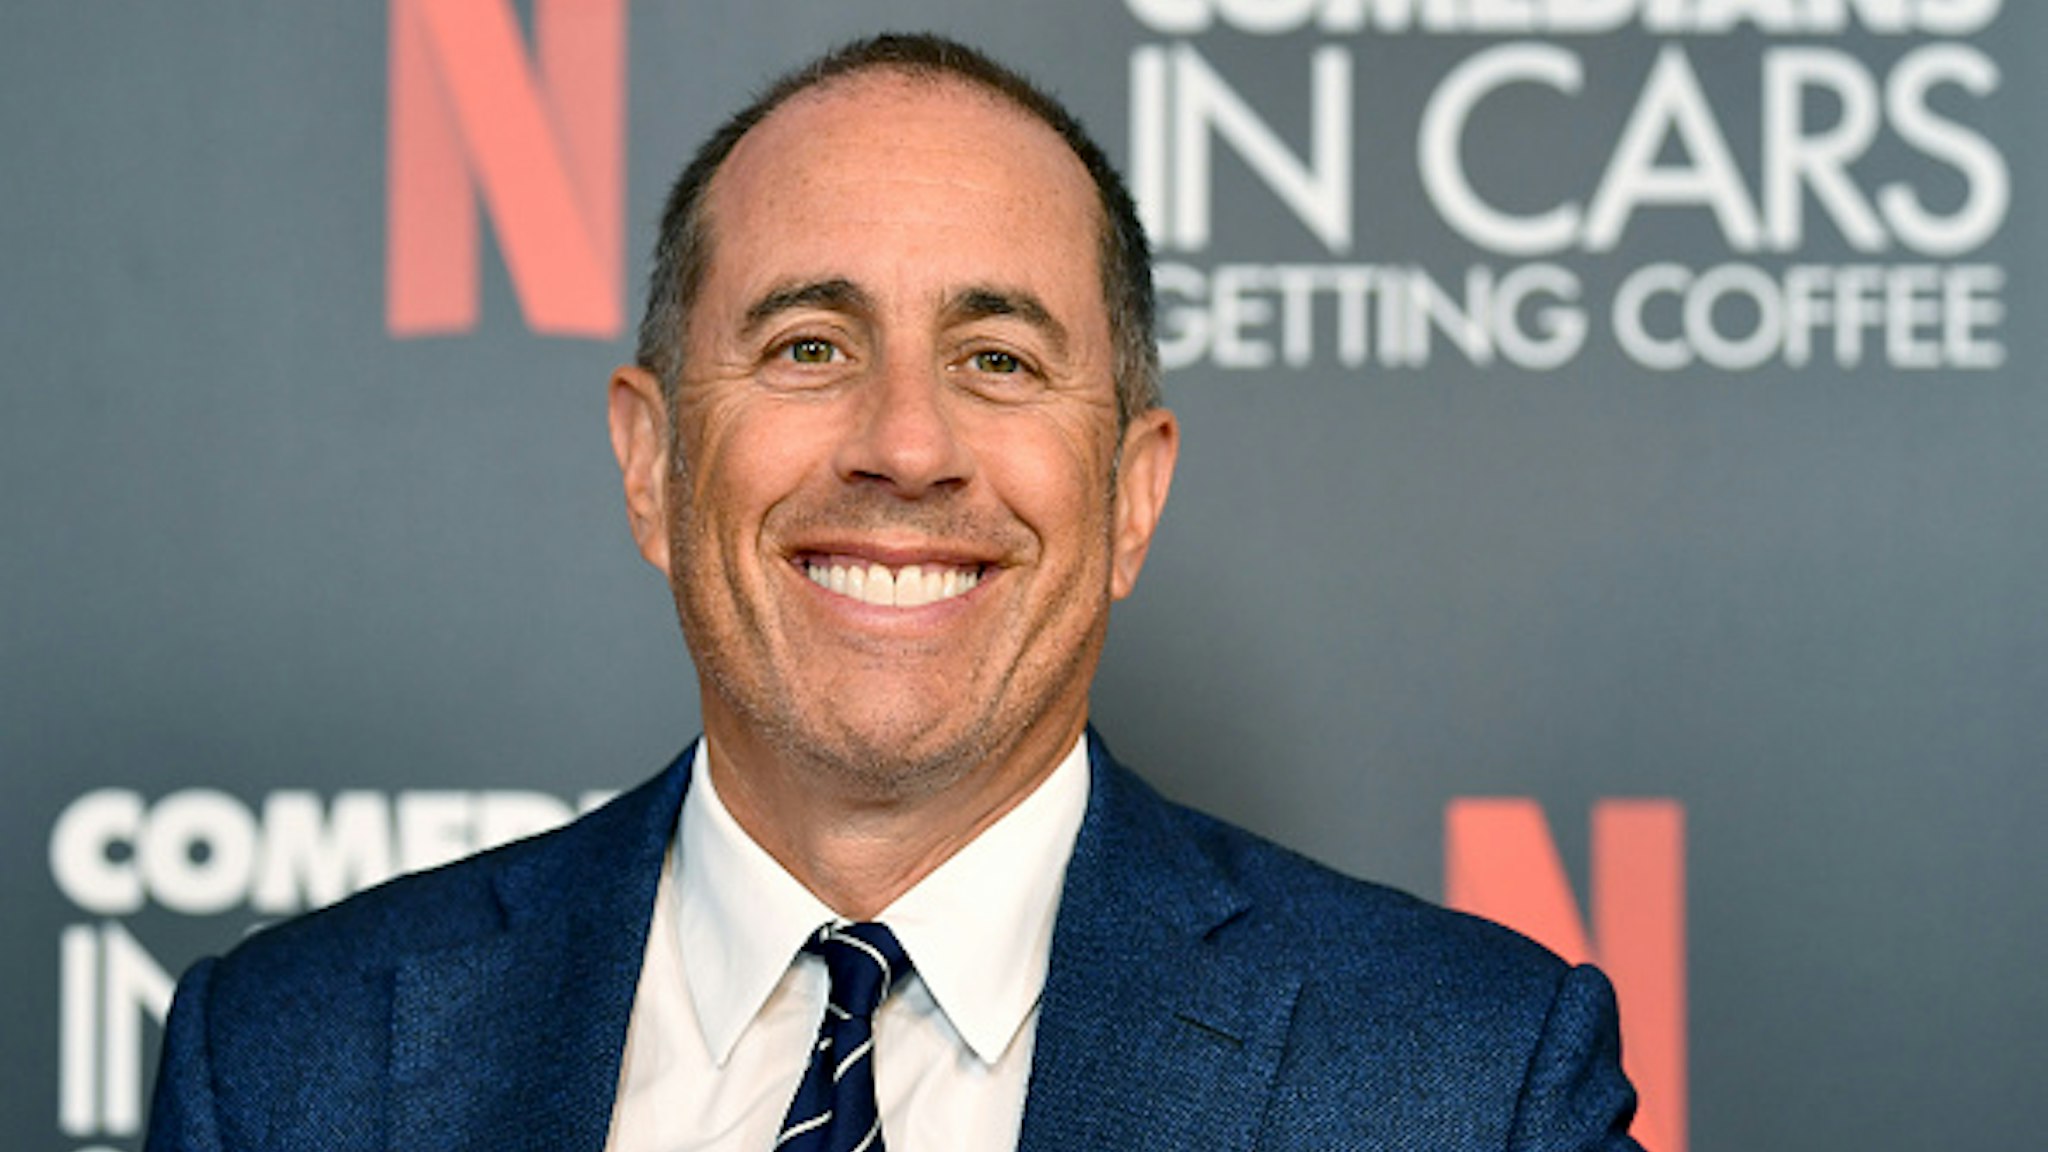 BEVERLY HILLS, CALIFORNIA - JULY 17: Jerry Seinfeld attends the LA Tastemaker event for Comedians in Cars at The Paley Center for Media on July 17, 2019 in Beverly Hills City